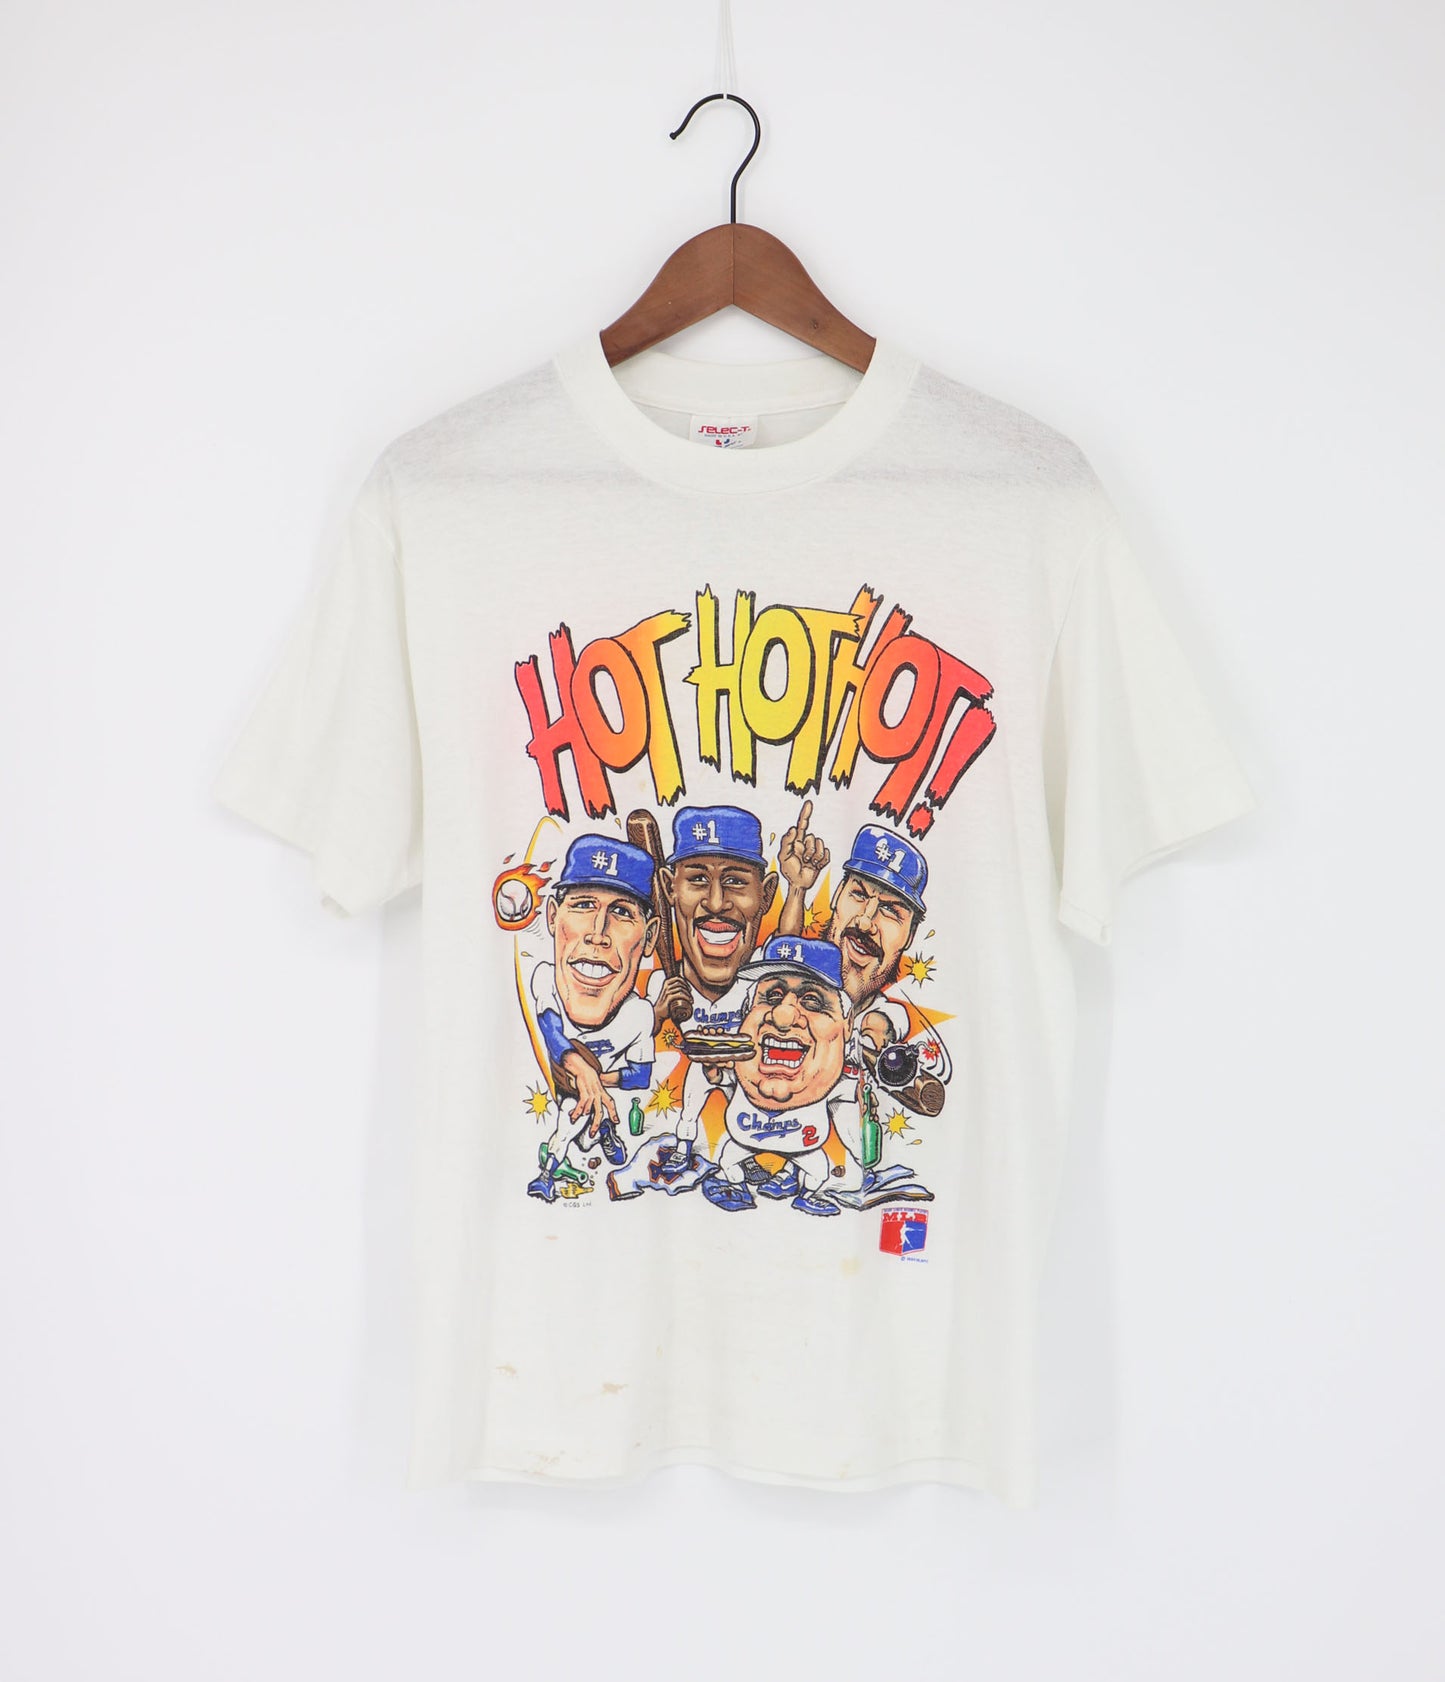 DODGERS CHARACTERS HOT HOT HOT 1988 MADE IN USA